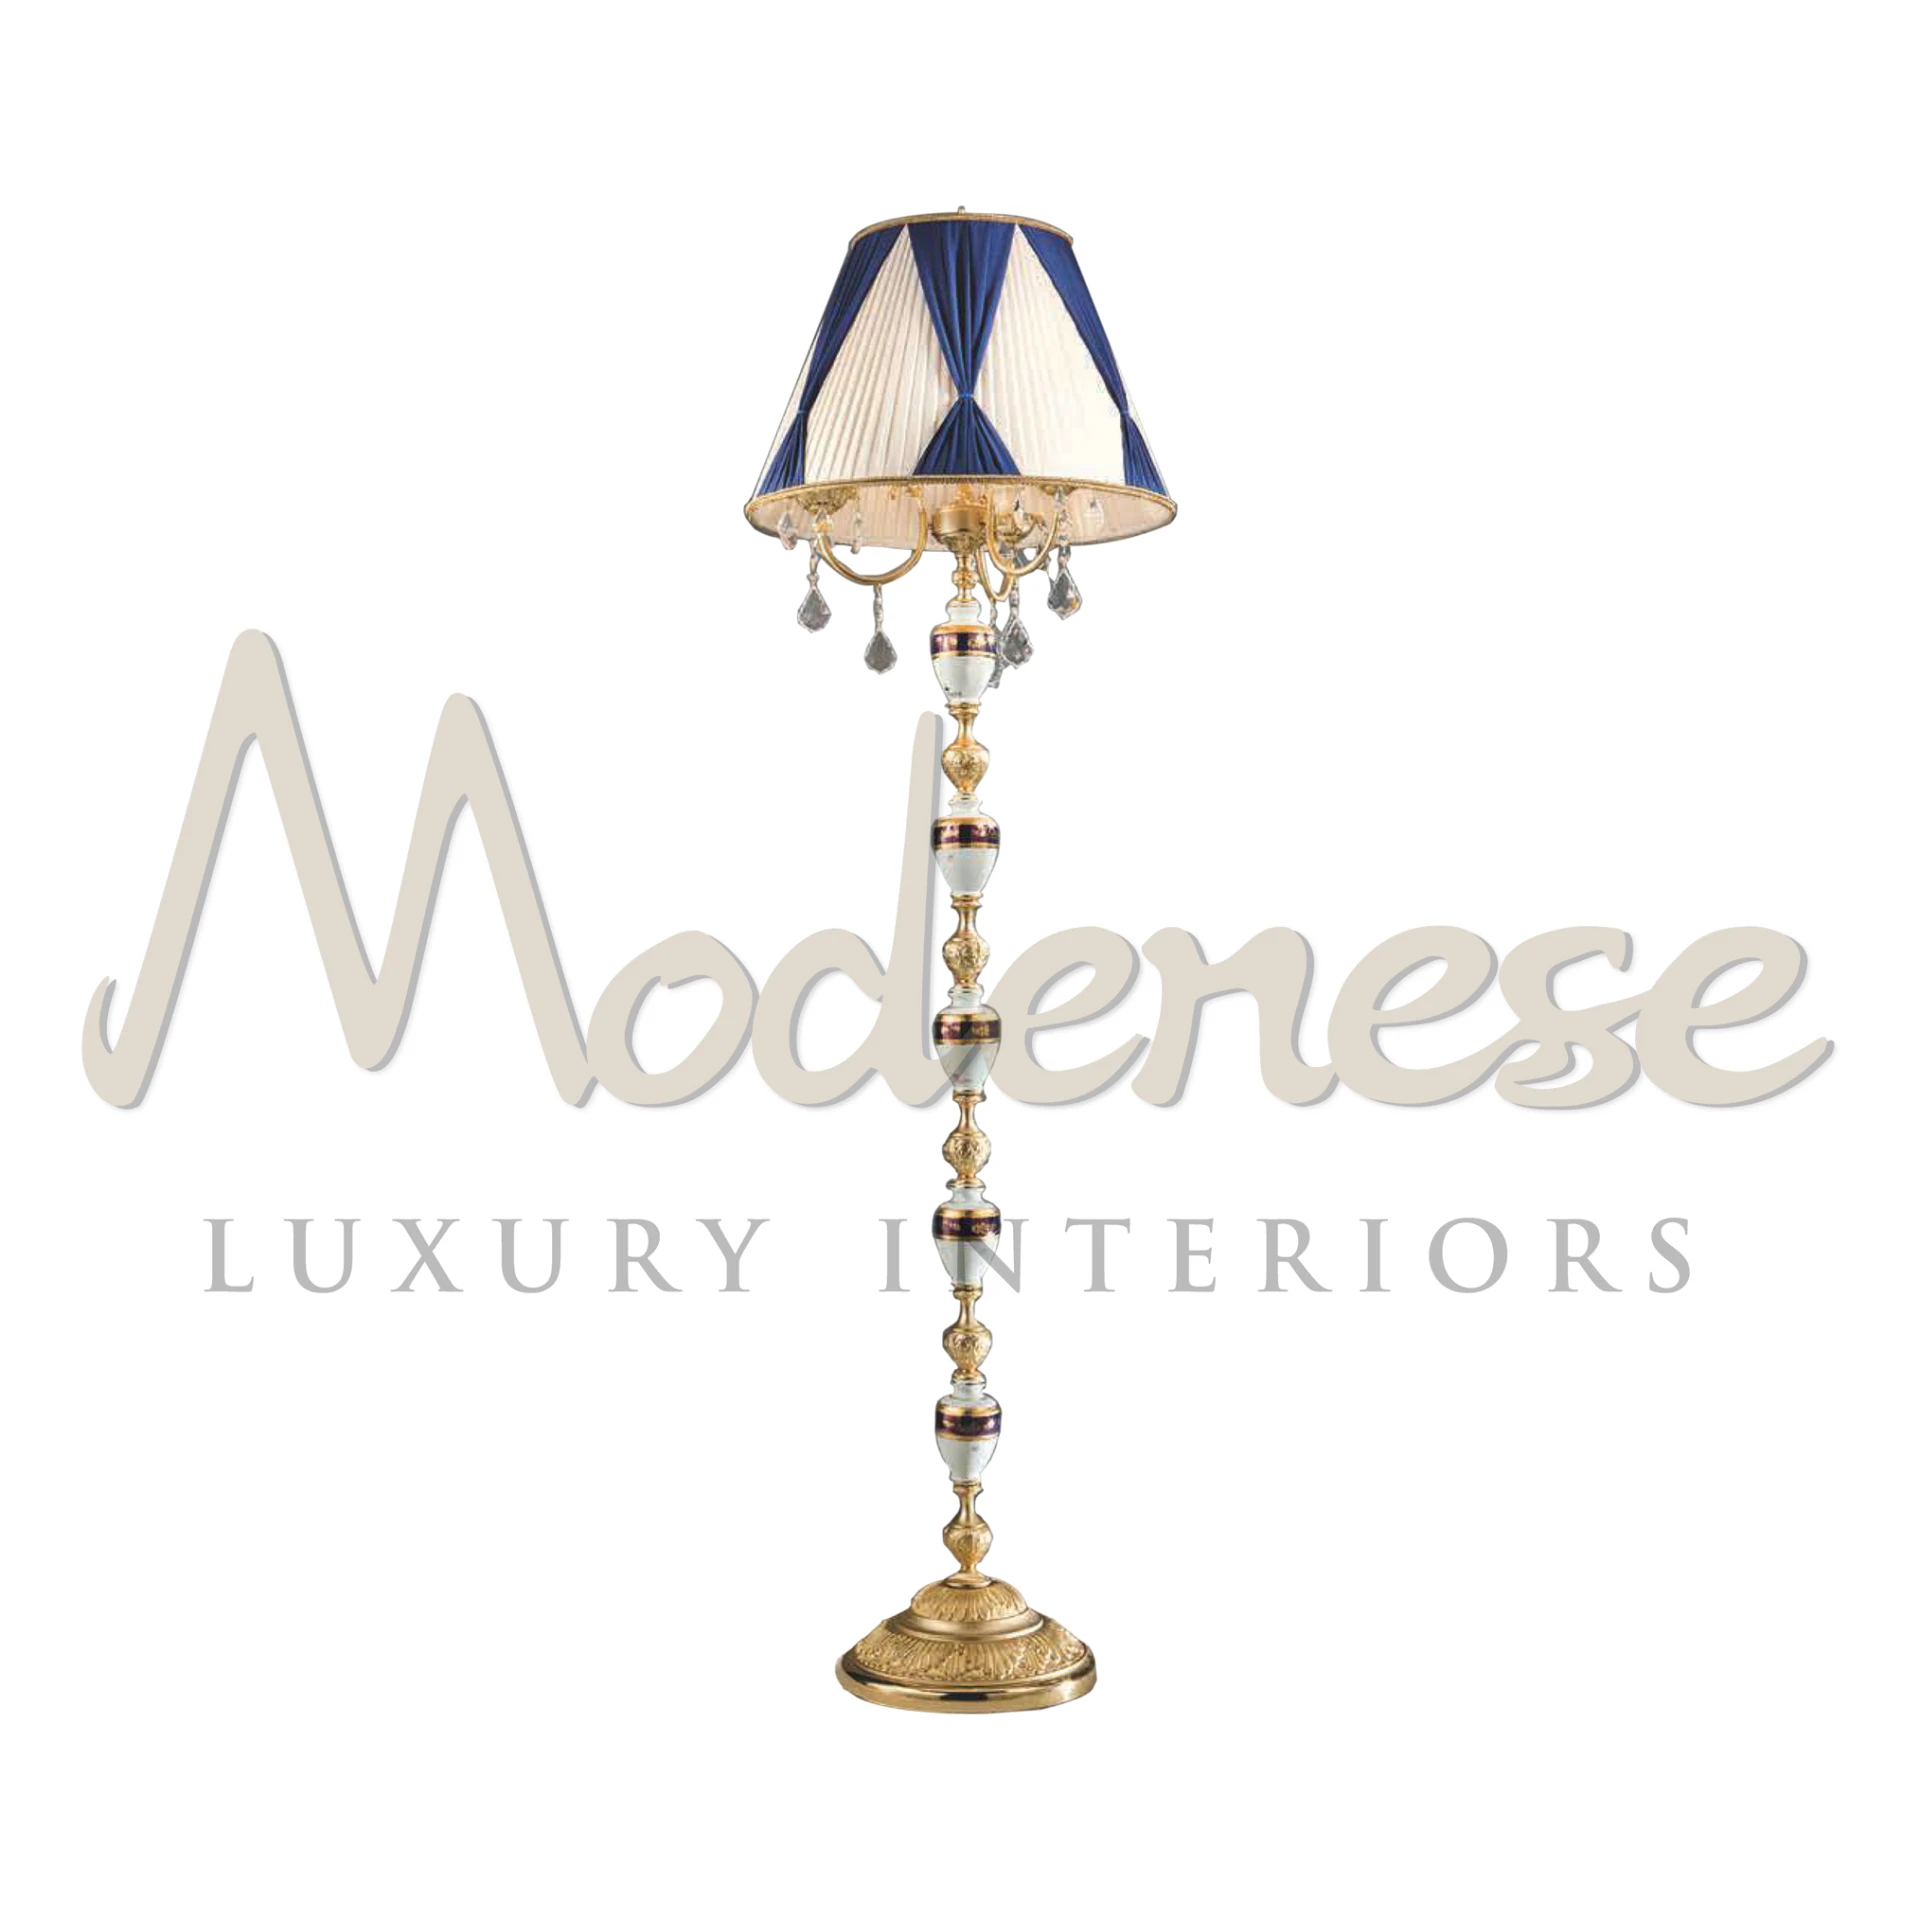 Stylish Floor Lamp by Modenese with blue and white striped shade and golden stand with crystals.